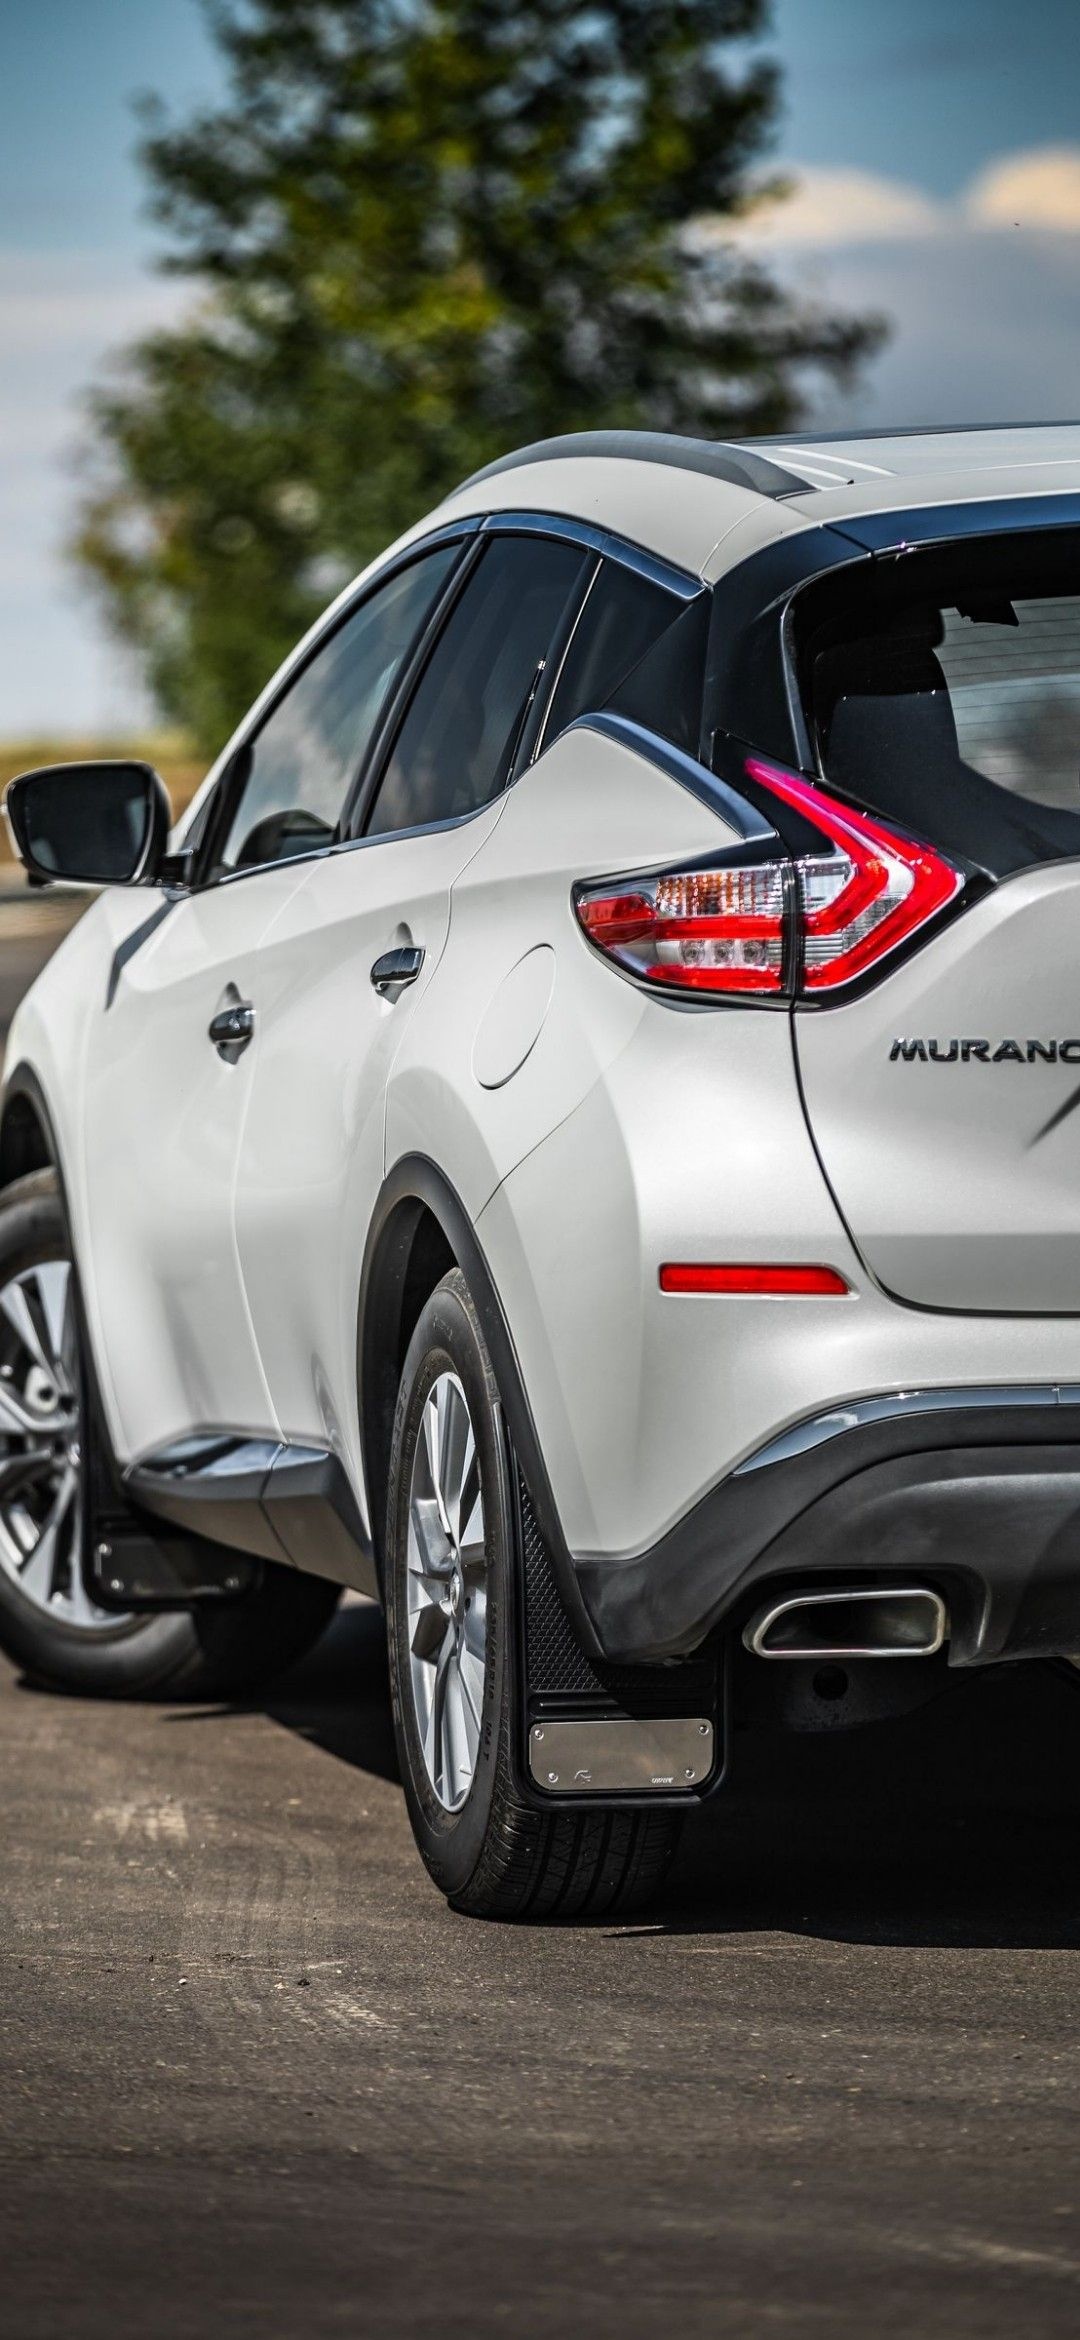 Nissan Murano, Car iPhone wallpaper, Cars and motorcycles, Free download, 1080x2340 HD Phone